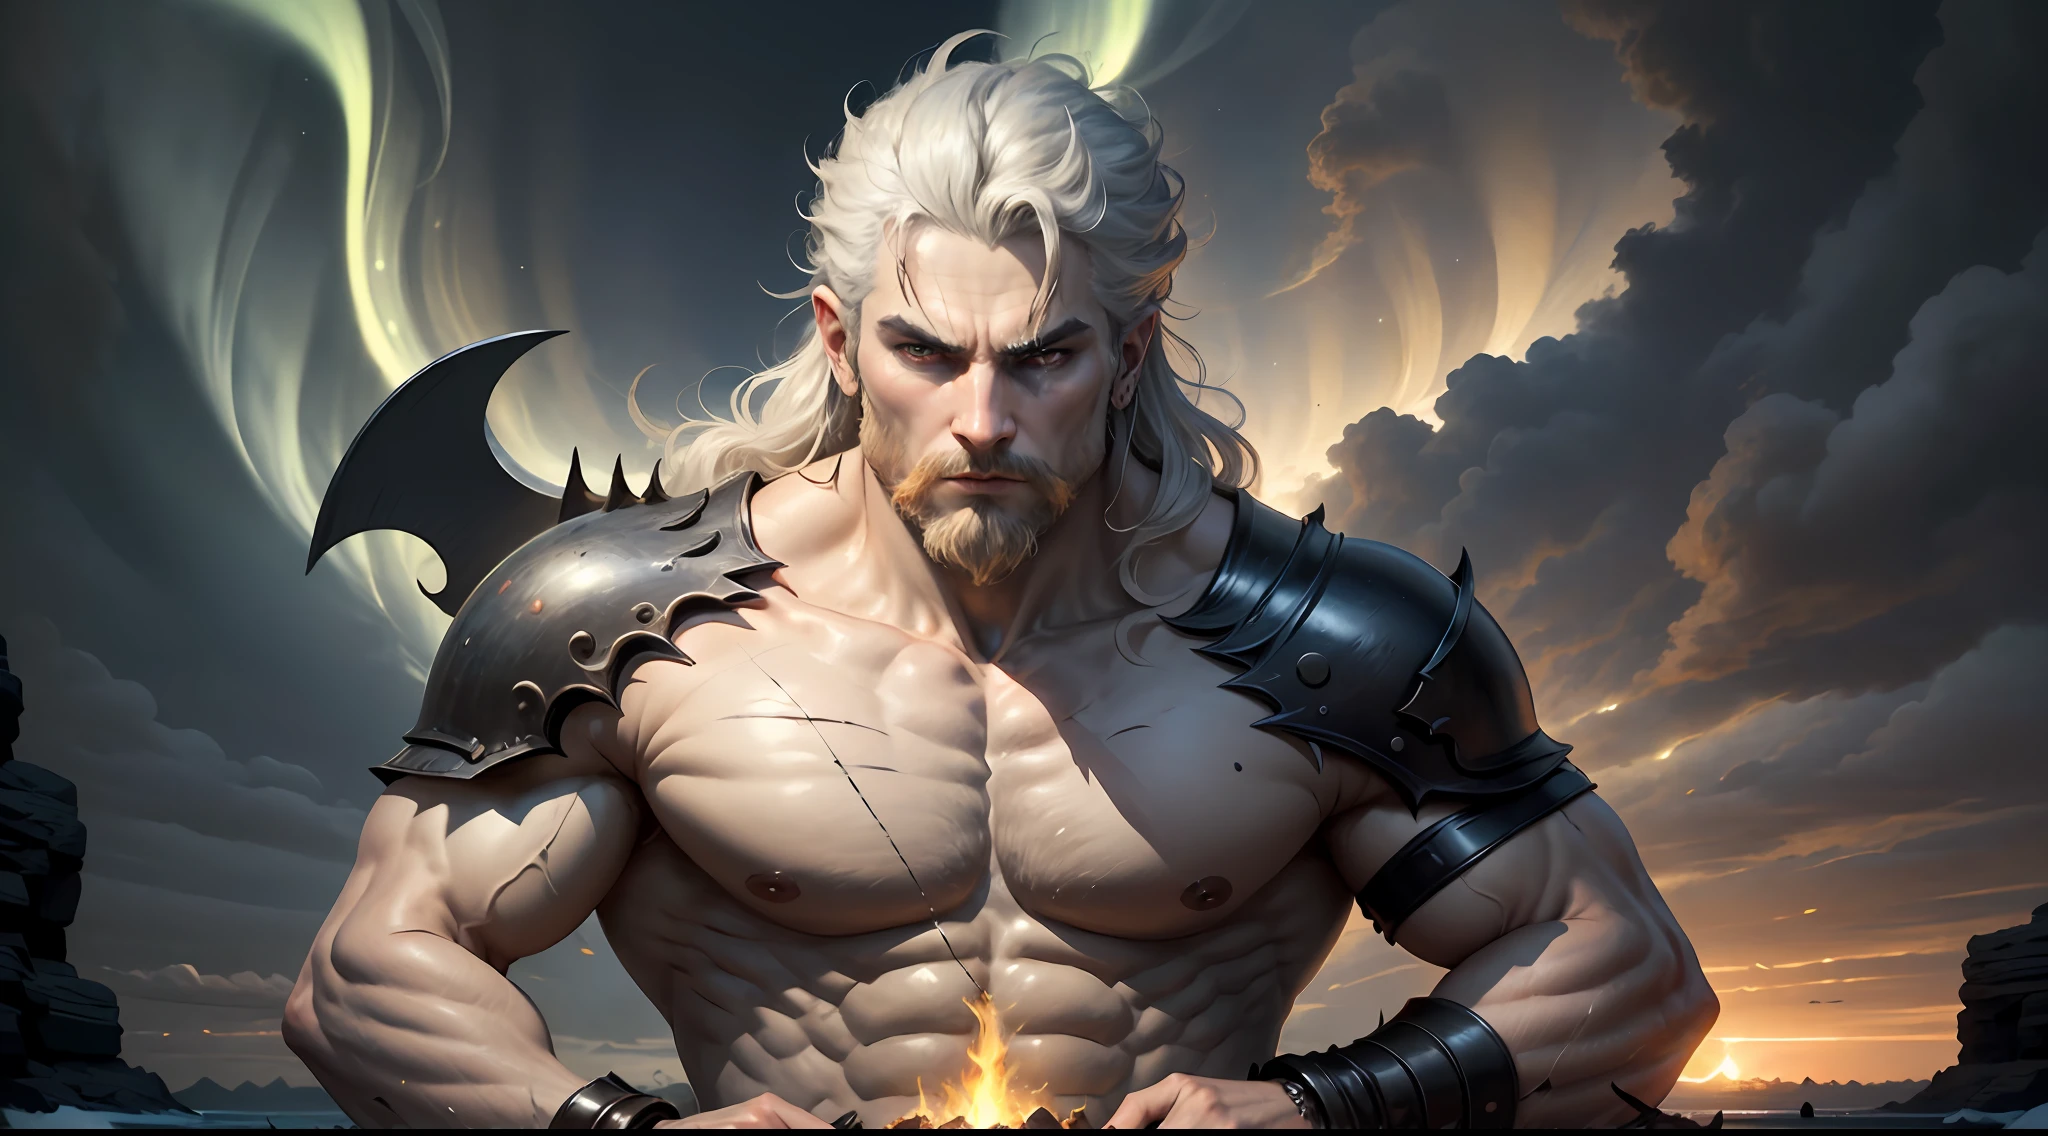 ((Best Quality)), ((Masterpiece)), (Detailed), image of Hades the Greek, (mythology: 1.2), (Majestic appearance: 1.1), loose beard and hair, muscular physique, Wearing a trident (The Realm of the Underworld: 1.1), (A powerful creature: 1.2), (Divine aura: 1.1), (domineering look: 1.1), 8K разрешение Viking, rocker, Rockstar, Cool, glare, radiance, spectrum, titanium, titanium, warrior, samurai, Strong WILL, Mighty strength, Energy, zipper, Salute, northern lights